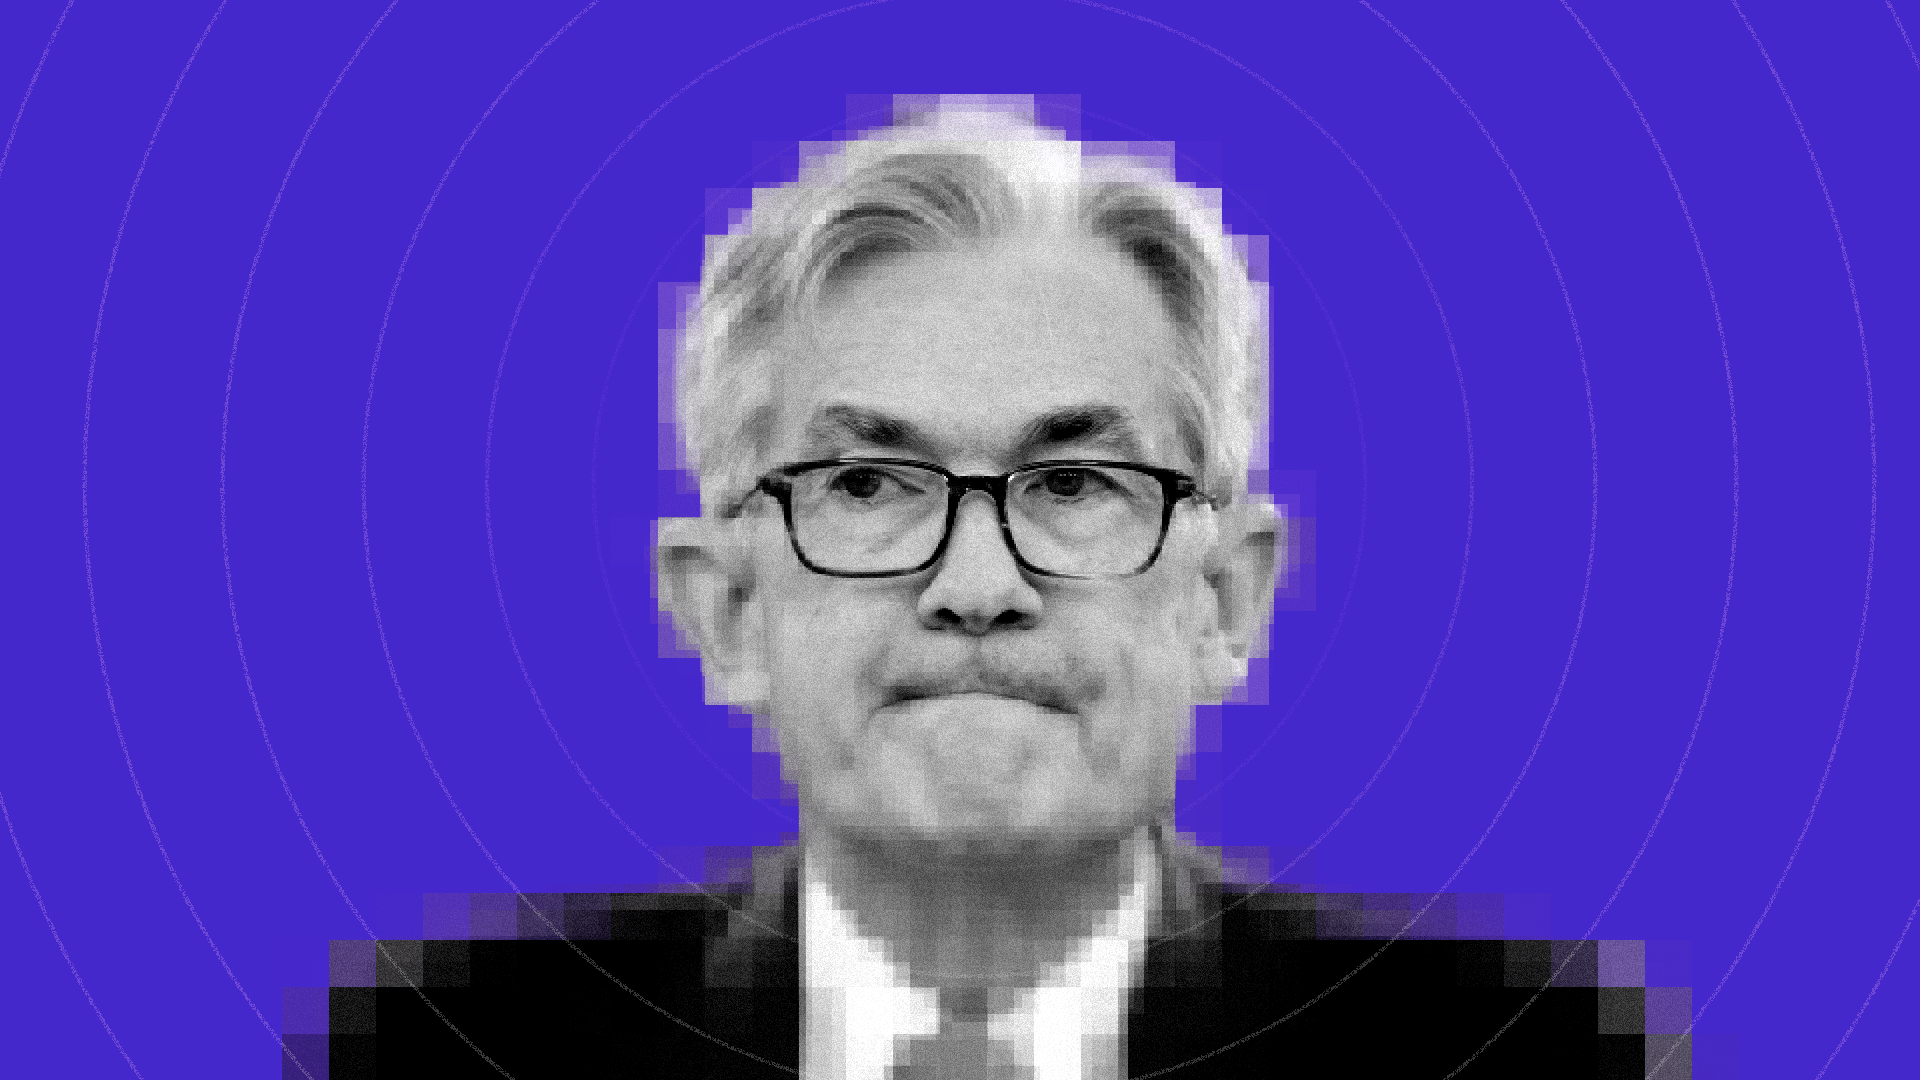 Animated photo illustration of Jerome Powell going in and out of focus. 